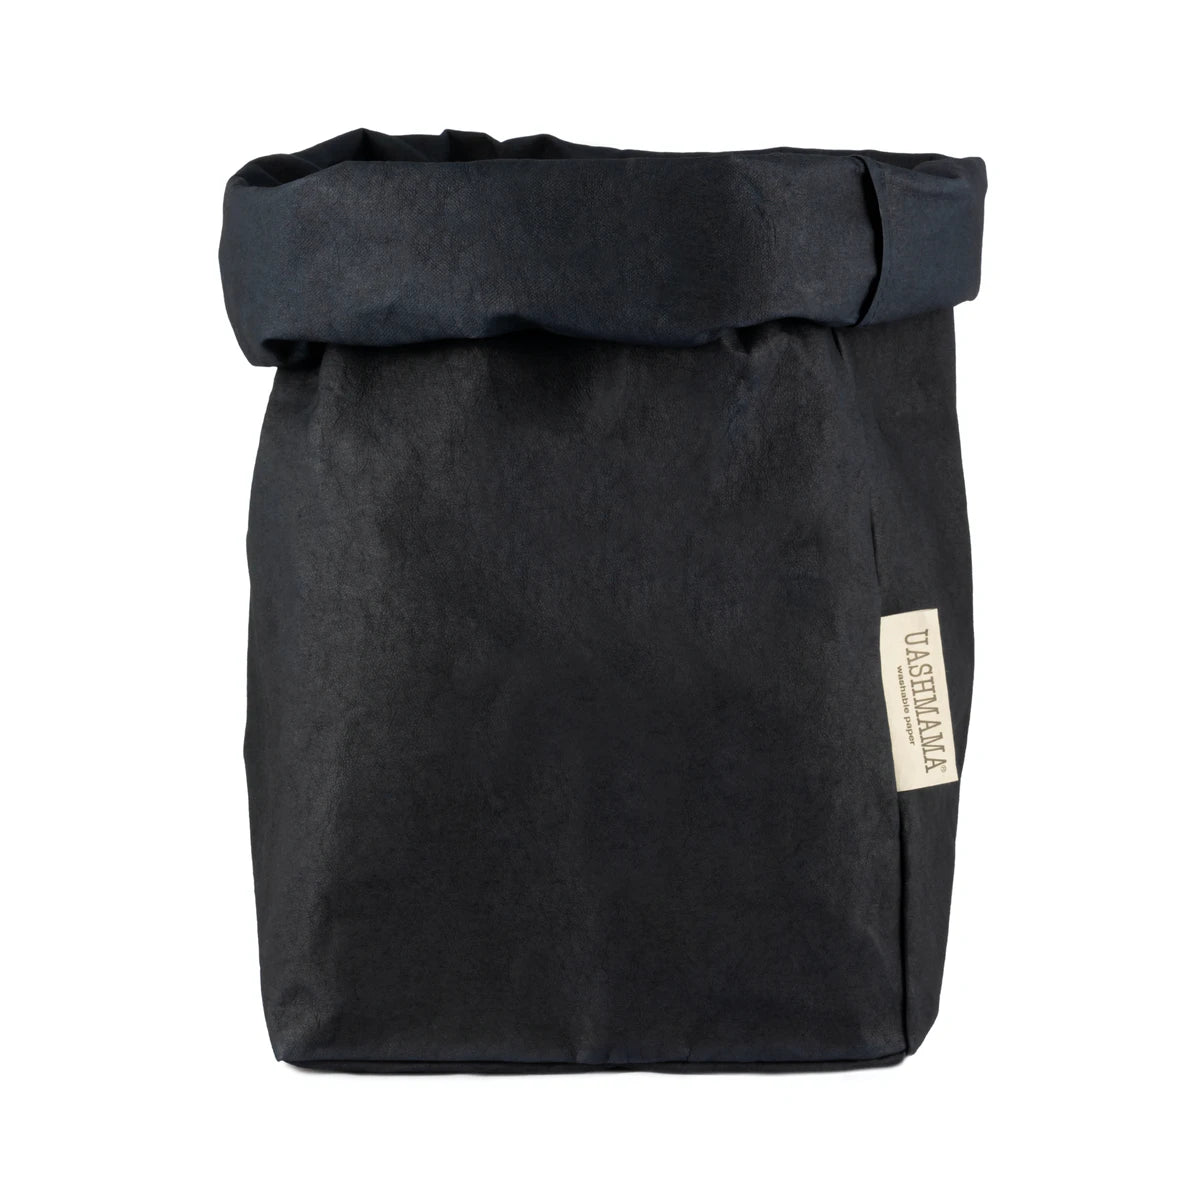 A washable paper bag is shown. The bag is rolled down at the top and features a UASHMAMA logo label on the bottom left corner. The bag pictured is the extra large size in dark blue.